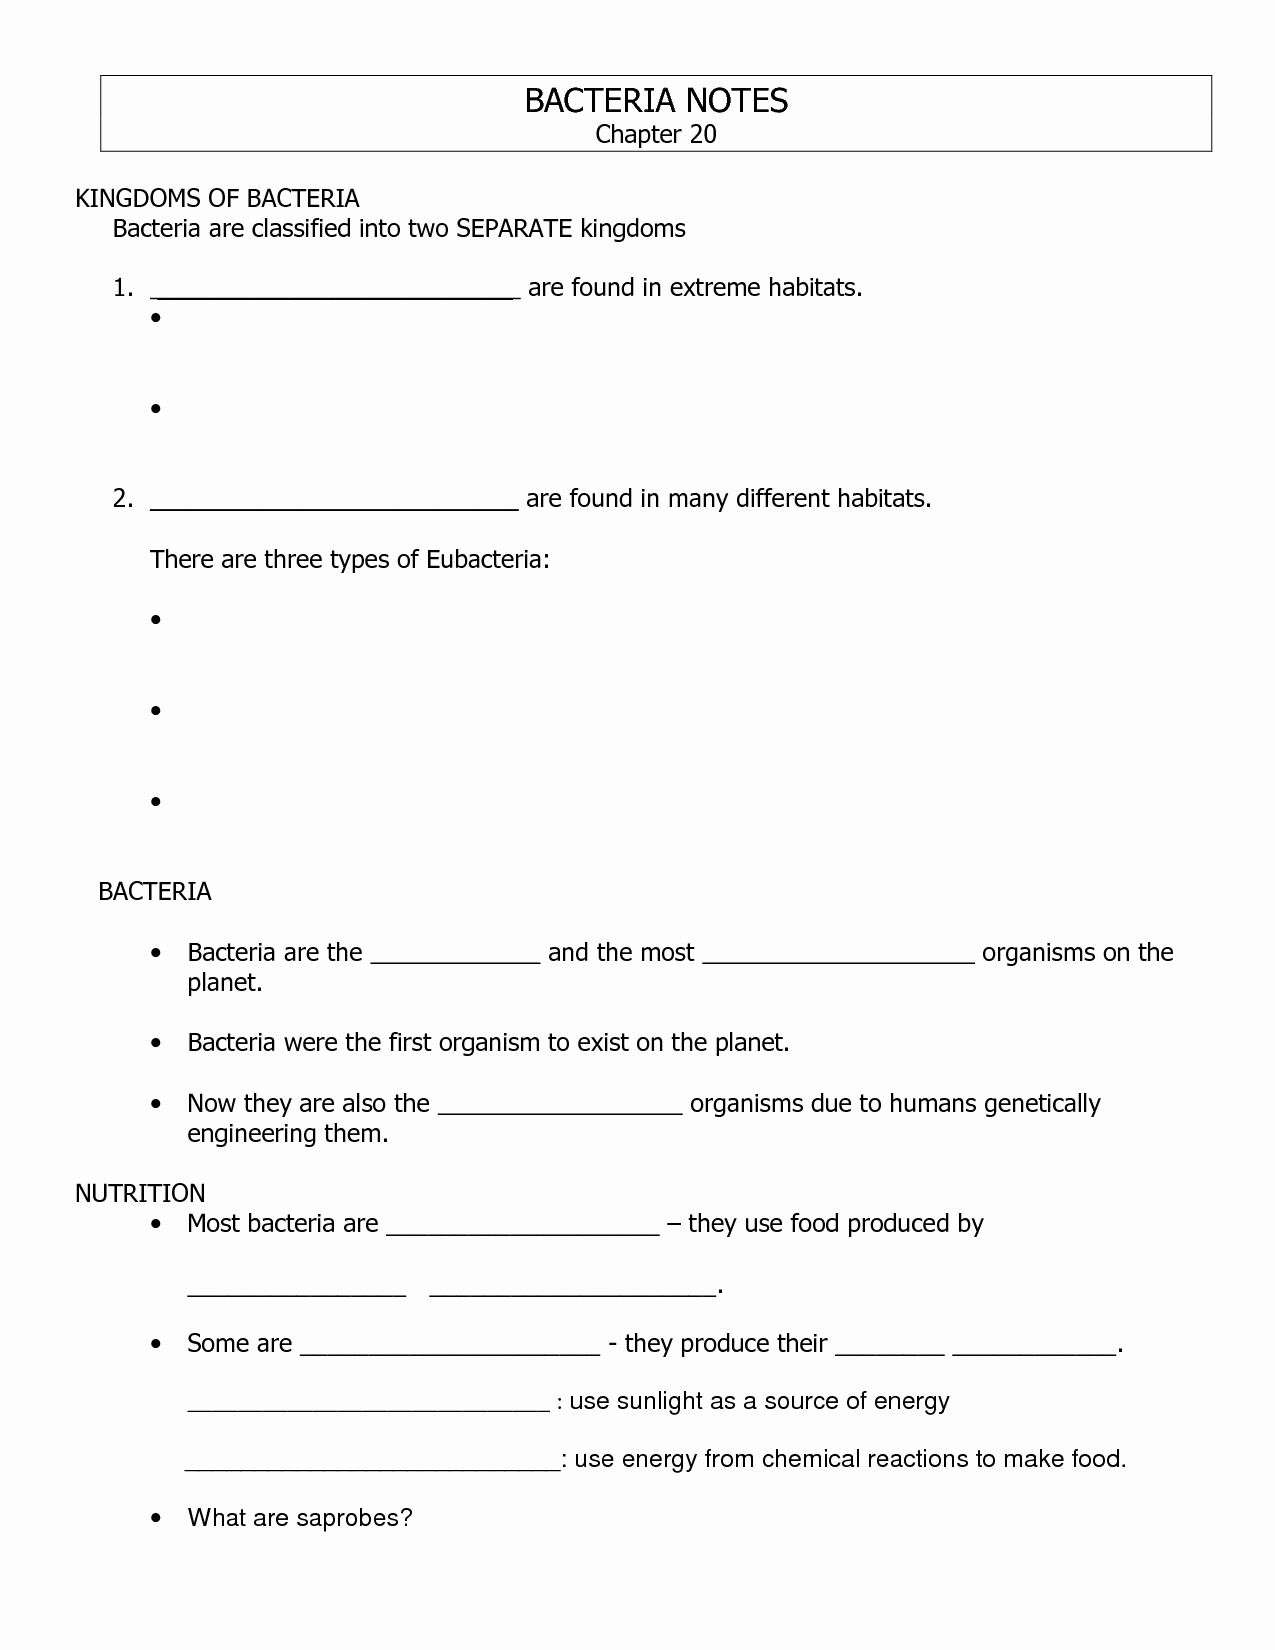 Virus and Bacteria Worksheet Key Awesome 14 Best Of Viruses and Bacteria Worksheets